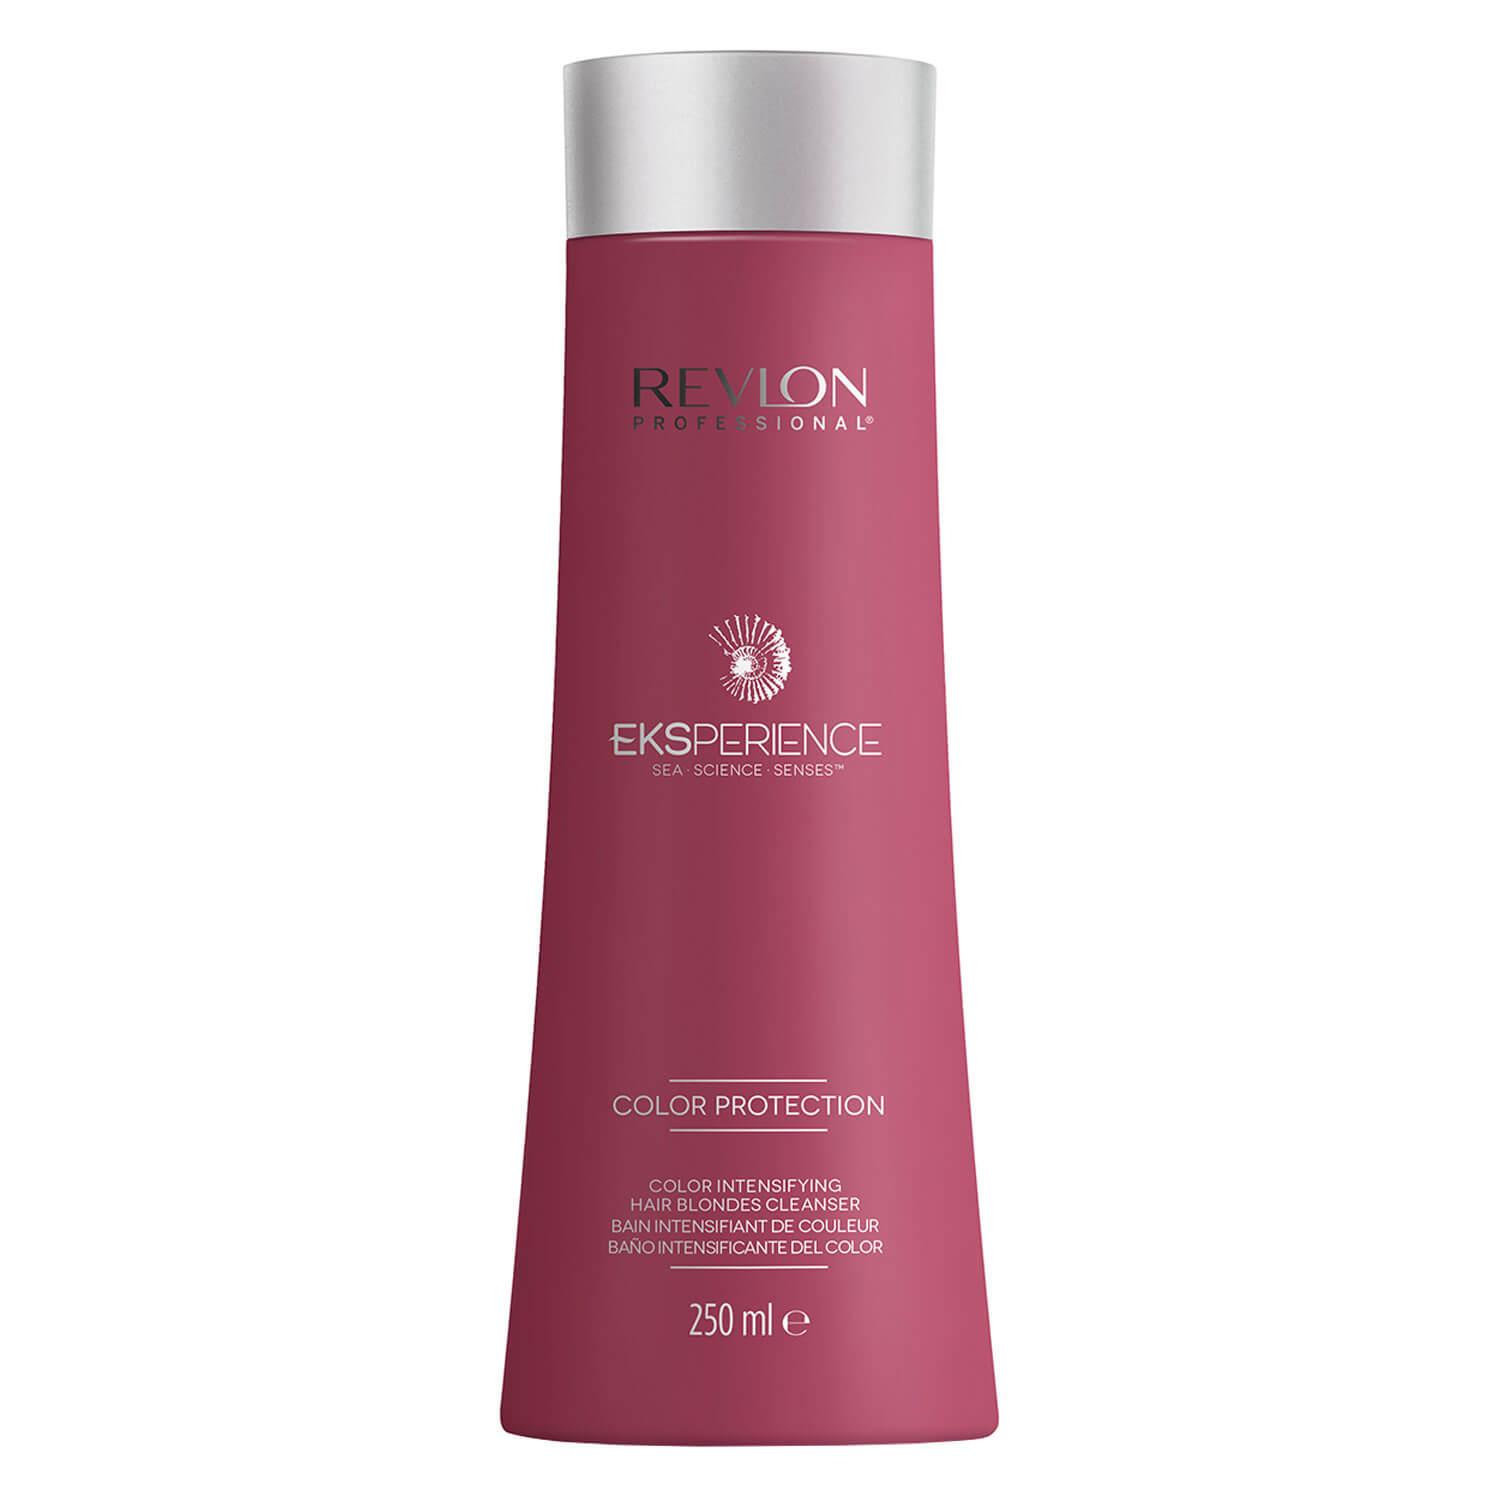 Eksperience Color Protection - Color Intensifying Hair Cleanser